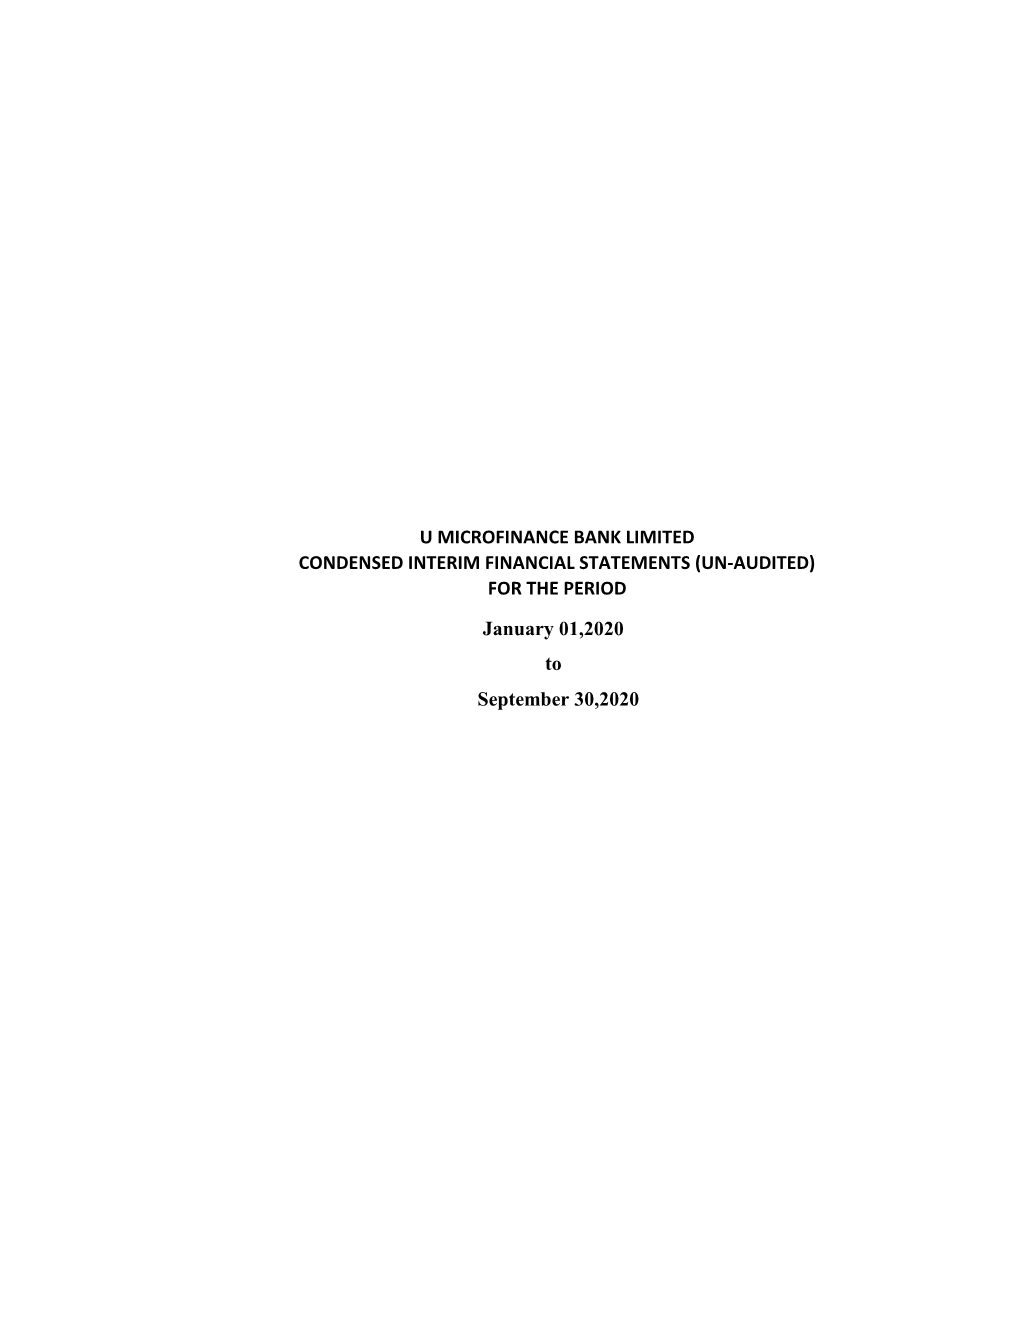 January 01,2020 to September 30,2020 U MICROFINANCE BANK LIMITED CONDENSED INTERIM FINANCIAL STATEMENTS (UN-AUDITED) FOR